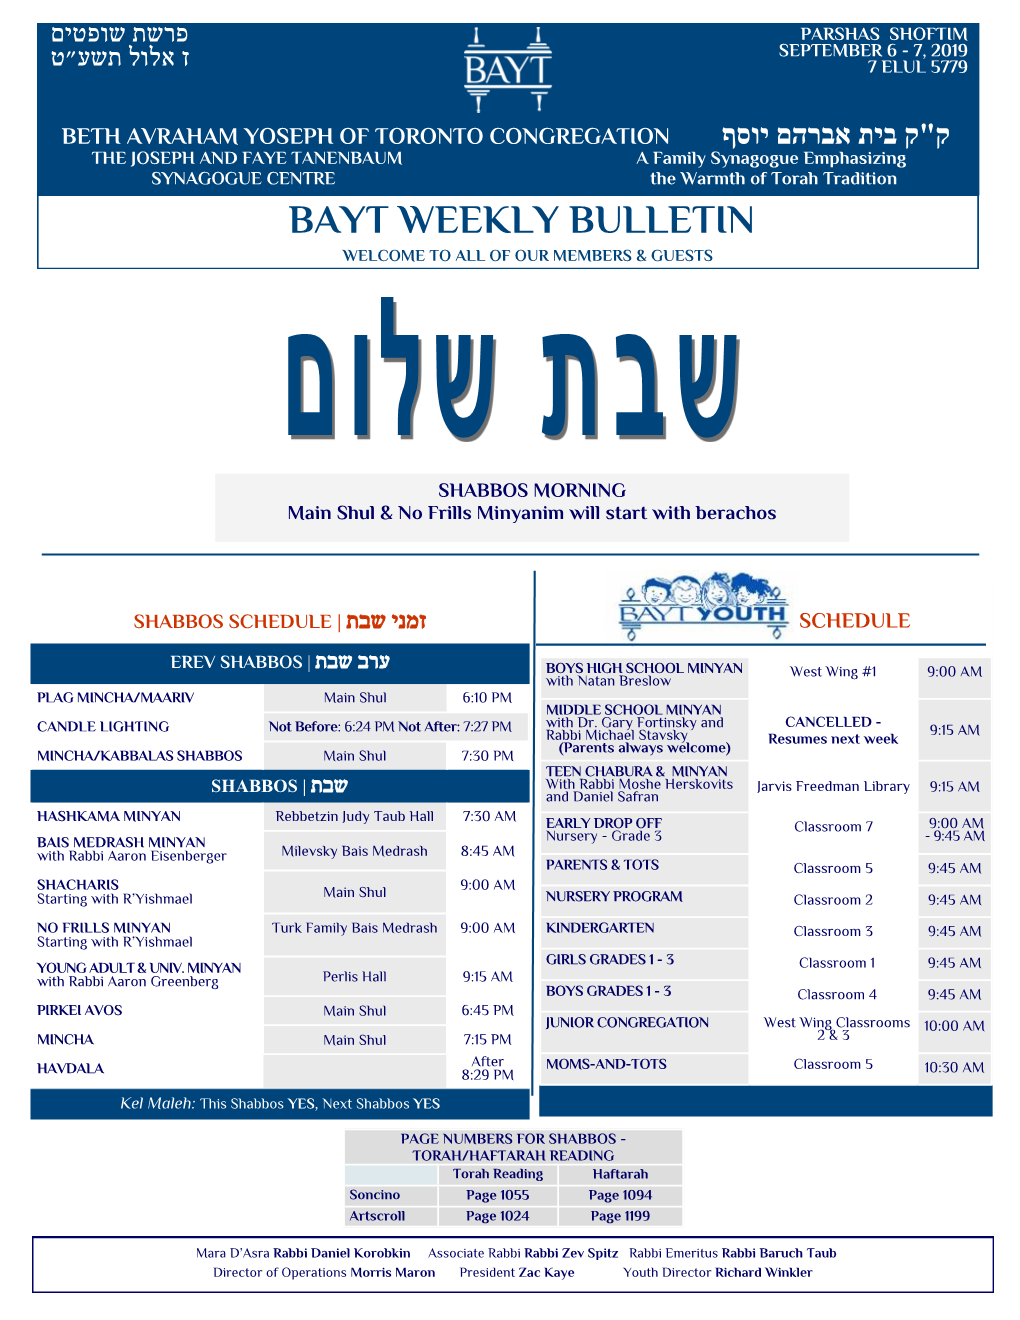 Bayt Weekly Bulletin Welcome to All of Our Members & Guests